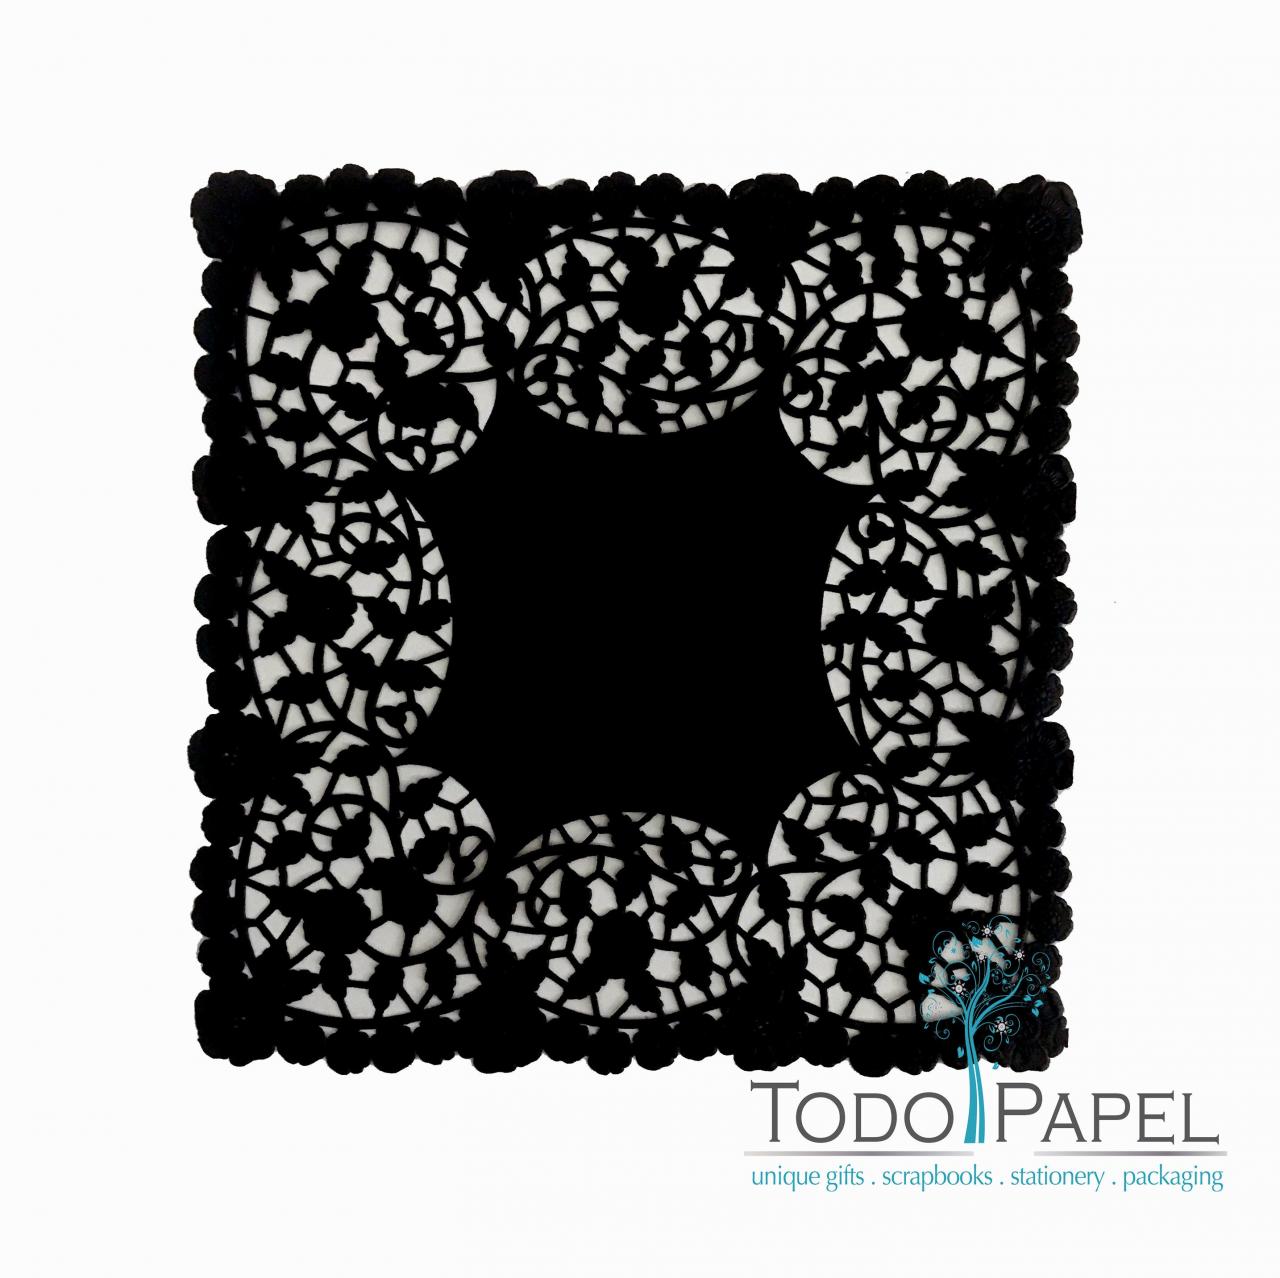 100 Pack Of High Quality 8 Inch Square Black Paper Lace Doilies | Elegant Edge Design For Weddings, Party Table Decor And As Invitation